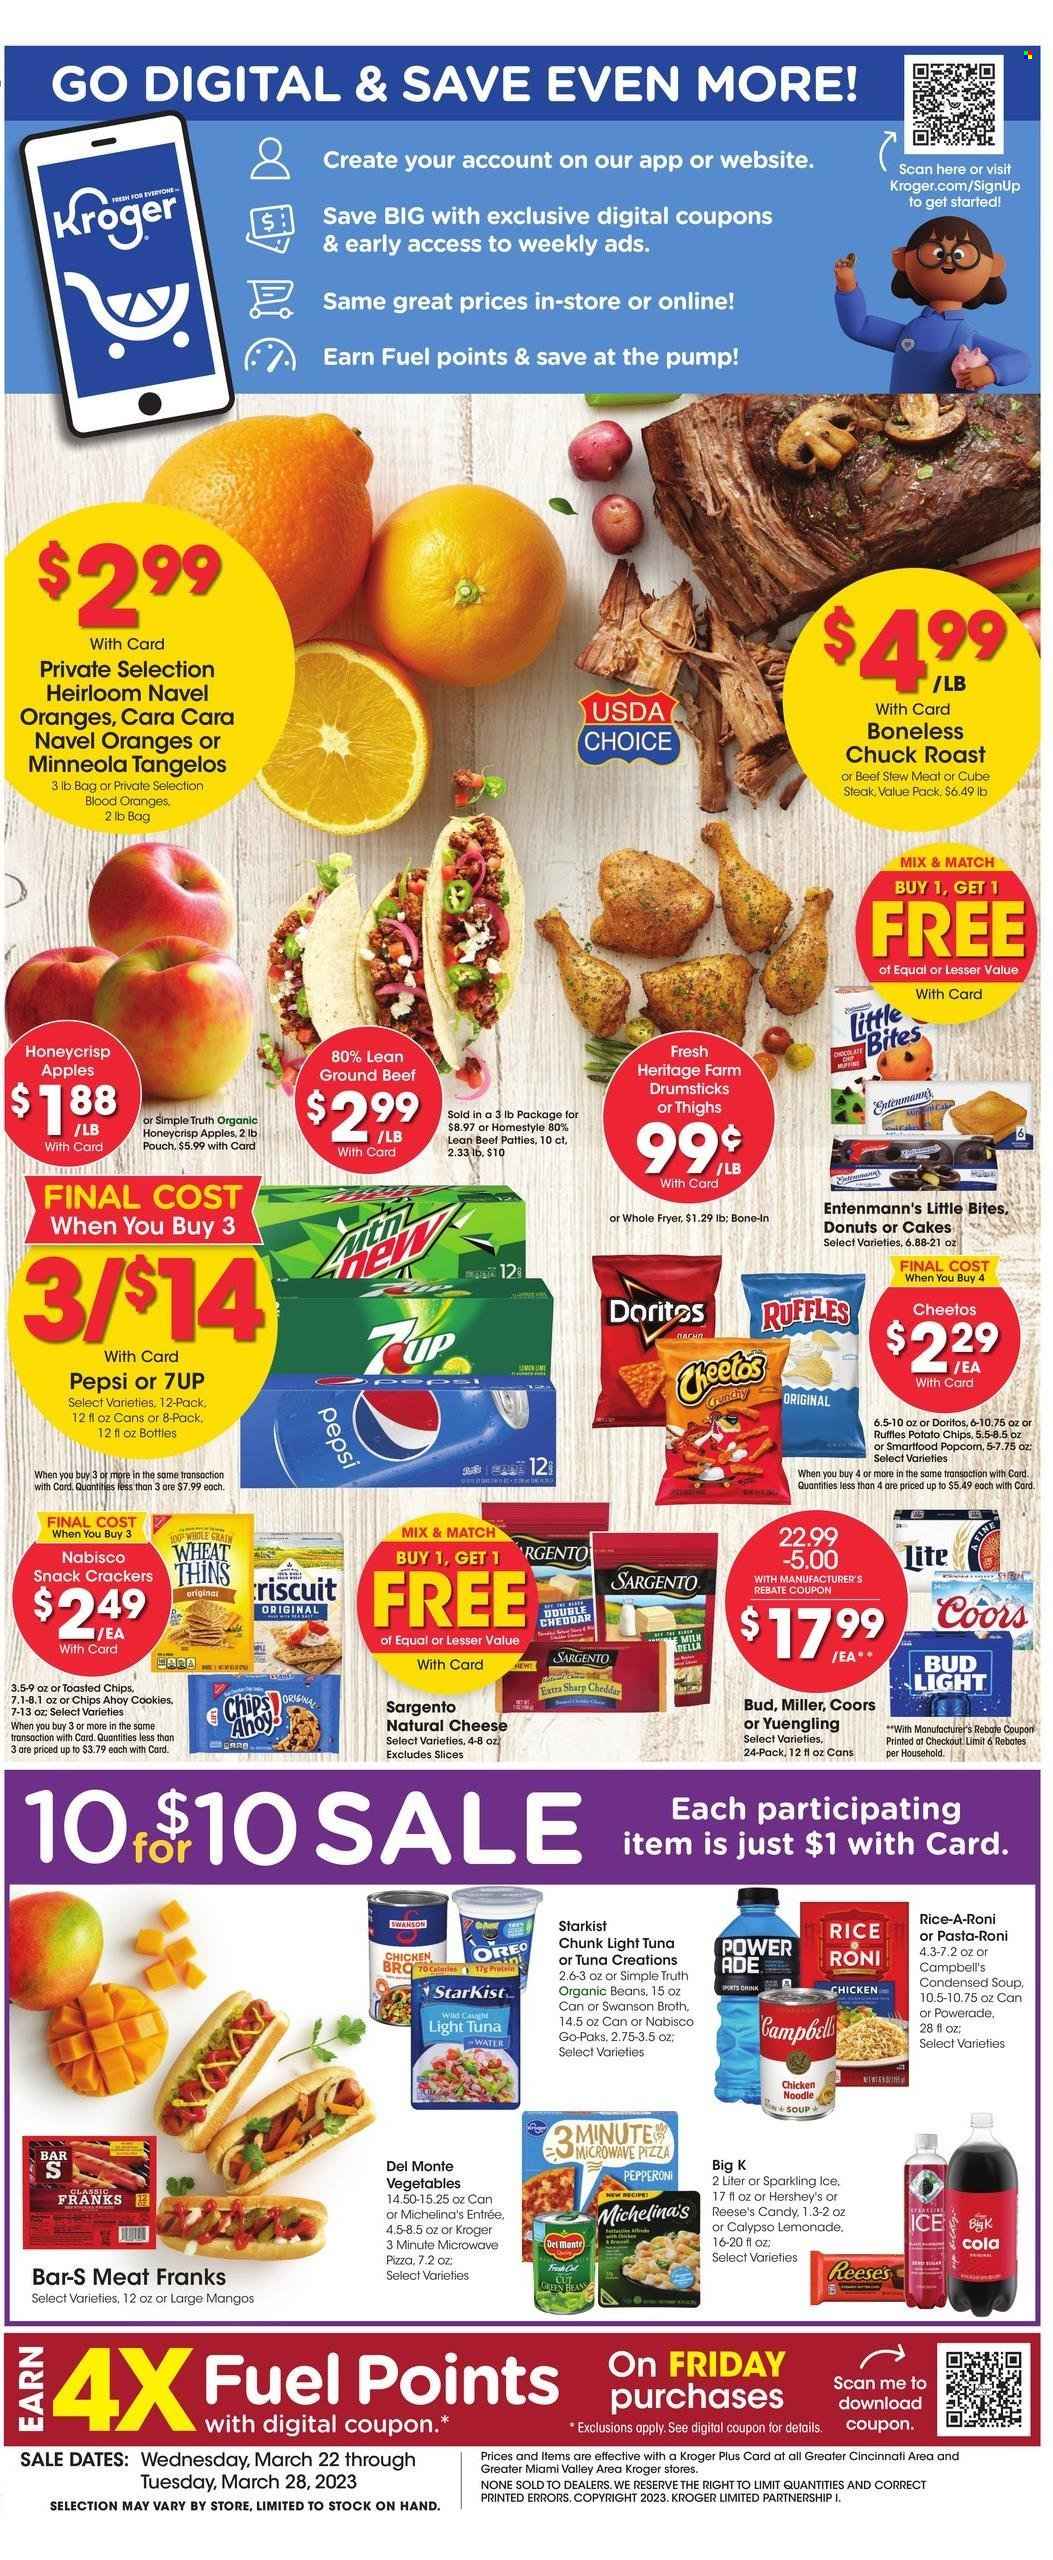 thumbnail - Kroger Flyer - 03/22/2023 - 03/28/2023 - Sales products - stew meat, cake, donut, Entenmann's, Bella, green beans, apples, tangelos, oranges, tuna, fish, StarKist, Campbell's, pizza, condensed soup, soup, noodles cup, noodles, instant soup, roast, pepperoni, cheese, Sargento, Oreo, milk, Reese's, Hershey's, cookies, snack, crackers, Little Bites, Doritos, potato chips, Cheetos, chips, Smartfood, Thins, Ruffles, broth, light tuna, Del Monte, rice, lemonade, Powerade, Pepsi, 7UP, water, beer, Bud Light, Miller, beef meat, ground beef, steak, chuck roast, server, microwave, pump, Coors, Yuengling, navel oranges. Page 1.